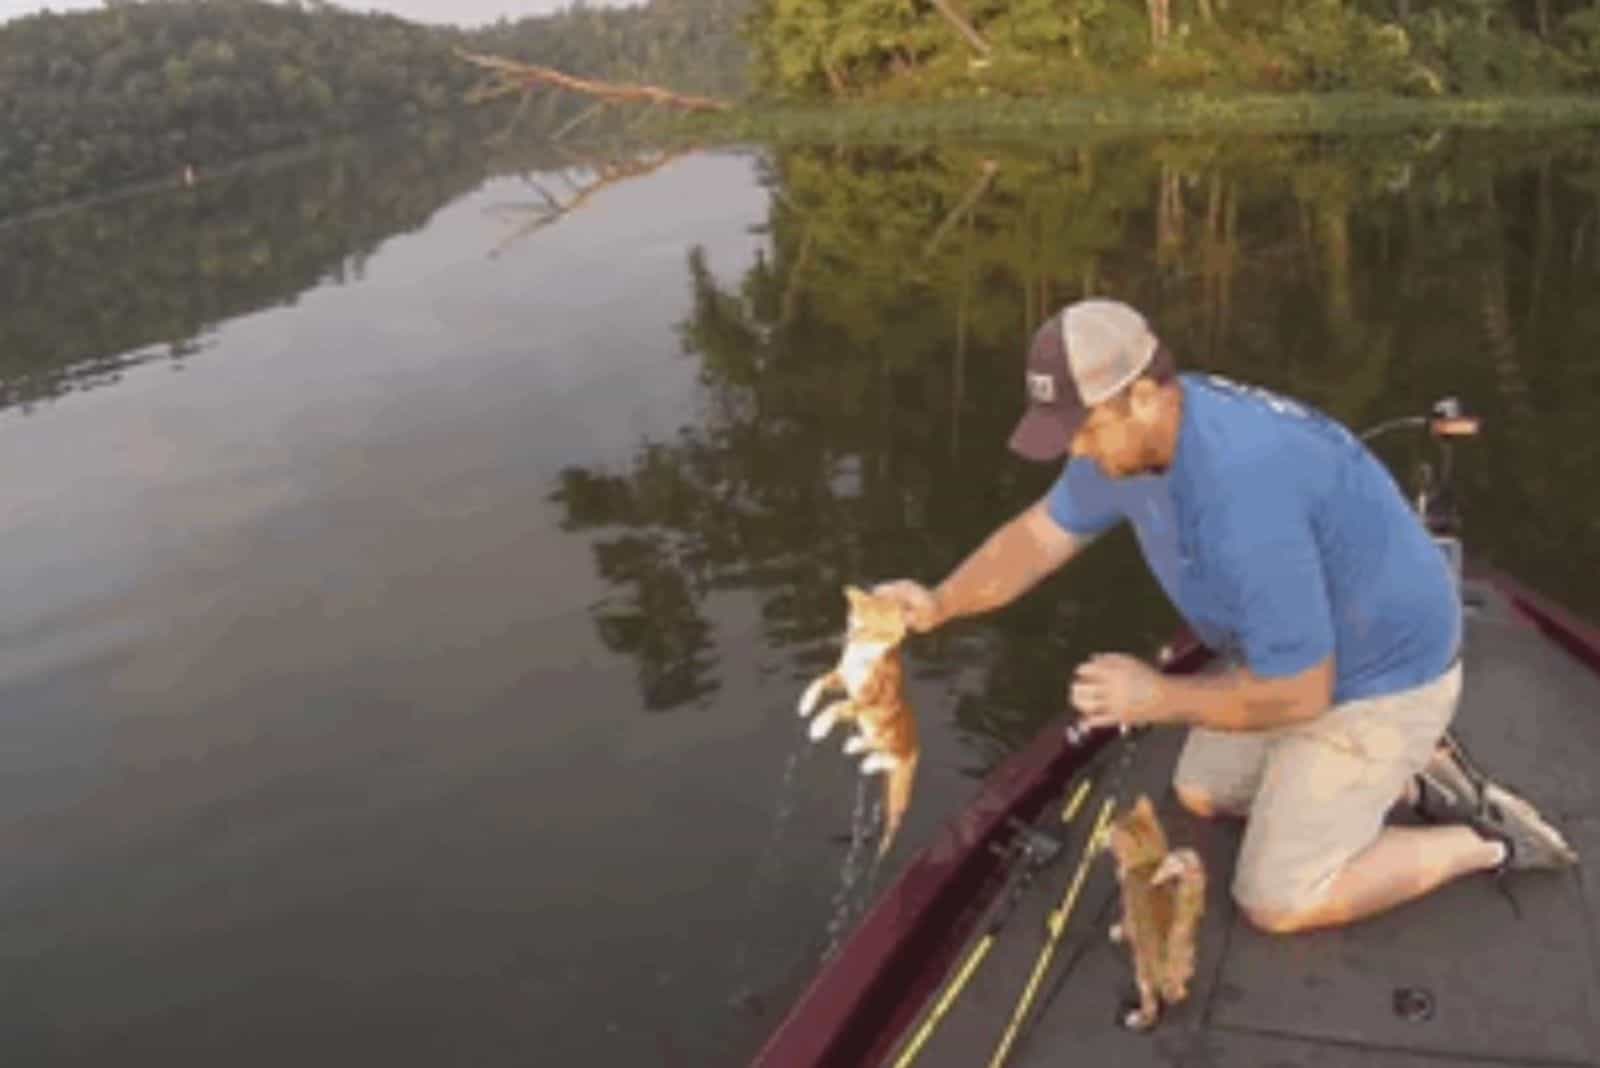 guy rescues kittens from a lake